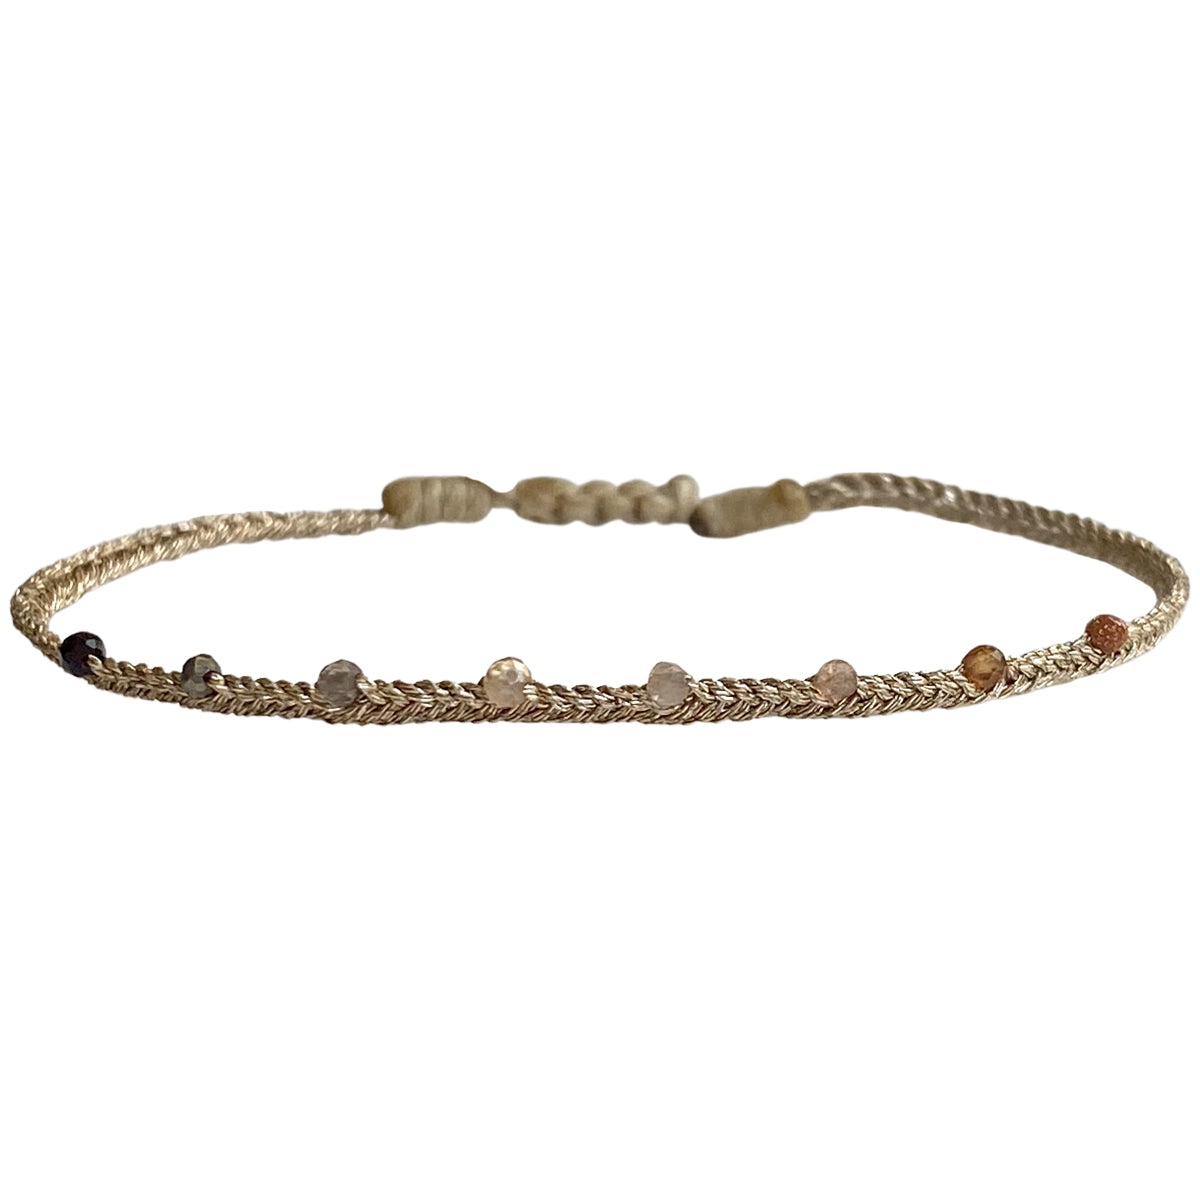 This LeJu bracelet has been handwoven in Colombia by our team of artisans using  metallic threads and intermixed semi-precious stones.  Wear it with your favourite accessories .  Details:  -Intermixed semi-precious stones  - Handwoven using metallic threads  - Width 3mm  - Adjustable bracelet  -Can be worn in the water